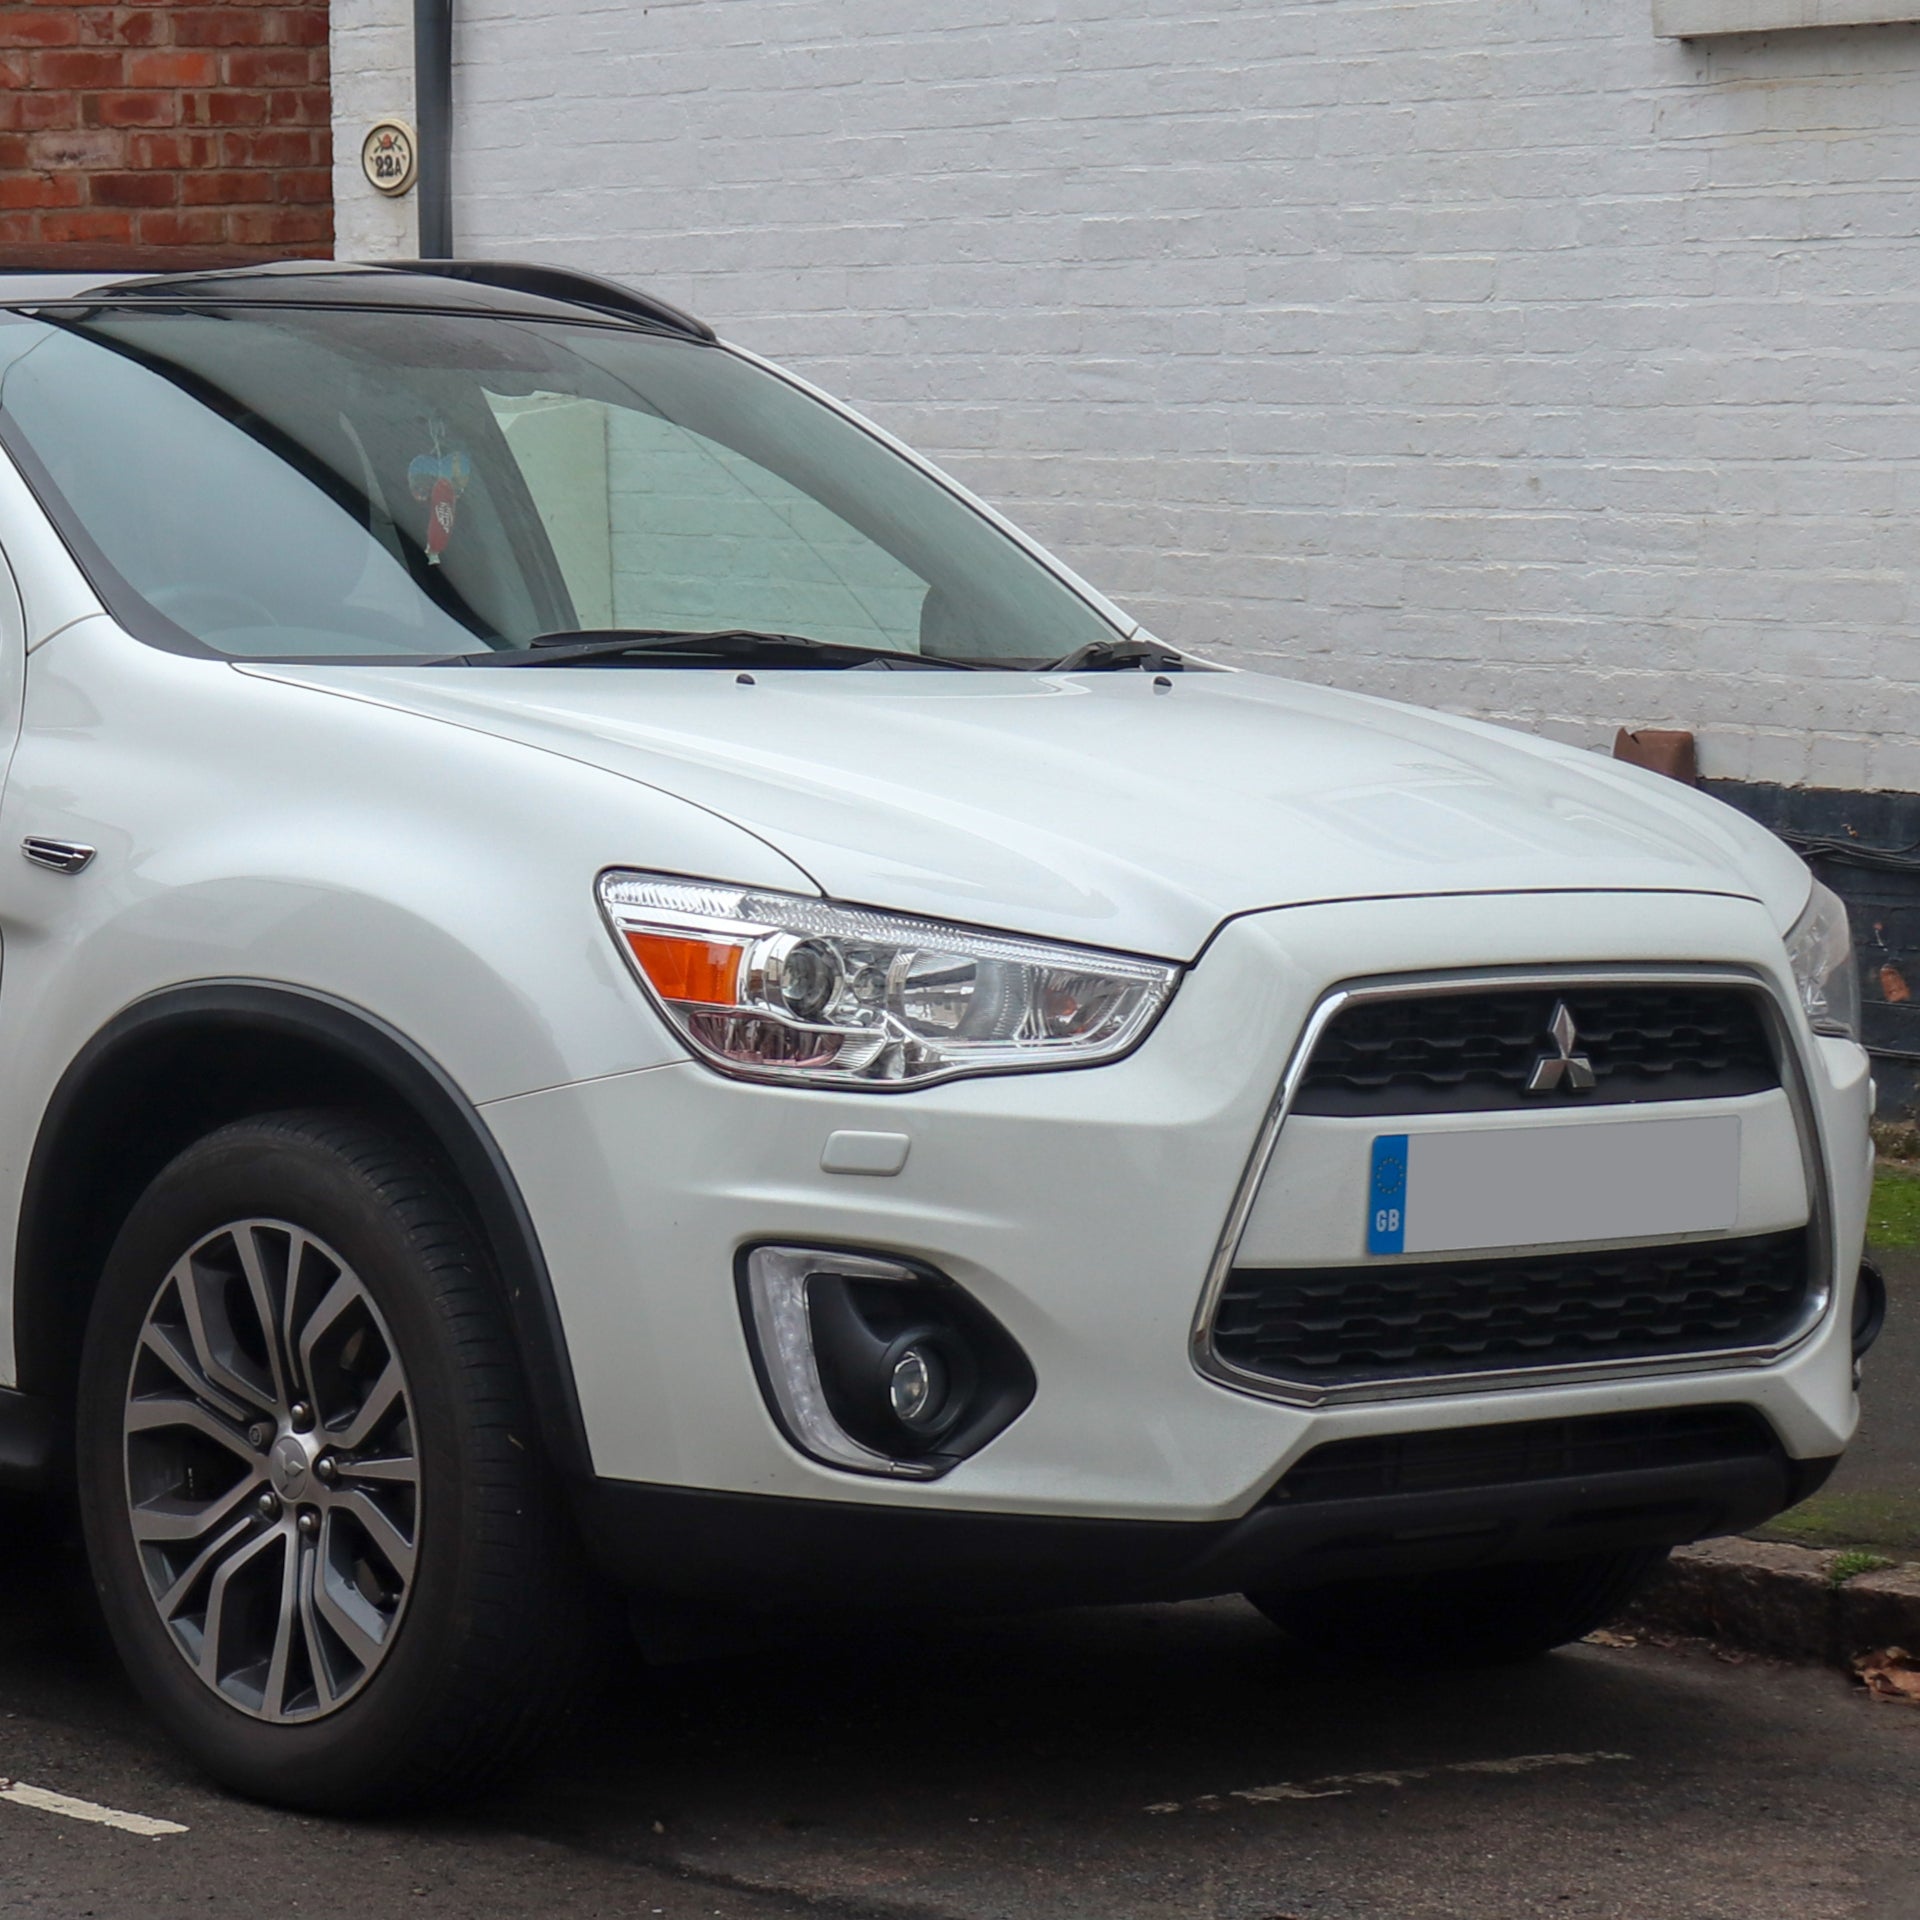 Direct4x4 accessories for Mitsubishi ASX vehicles with a photo of the front of a white Mitsubishi ASX parked next to a kerb